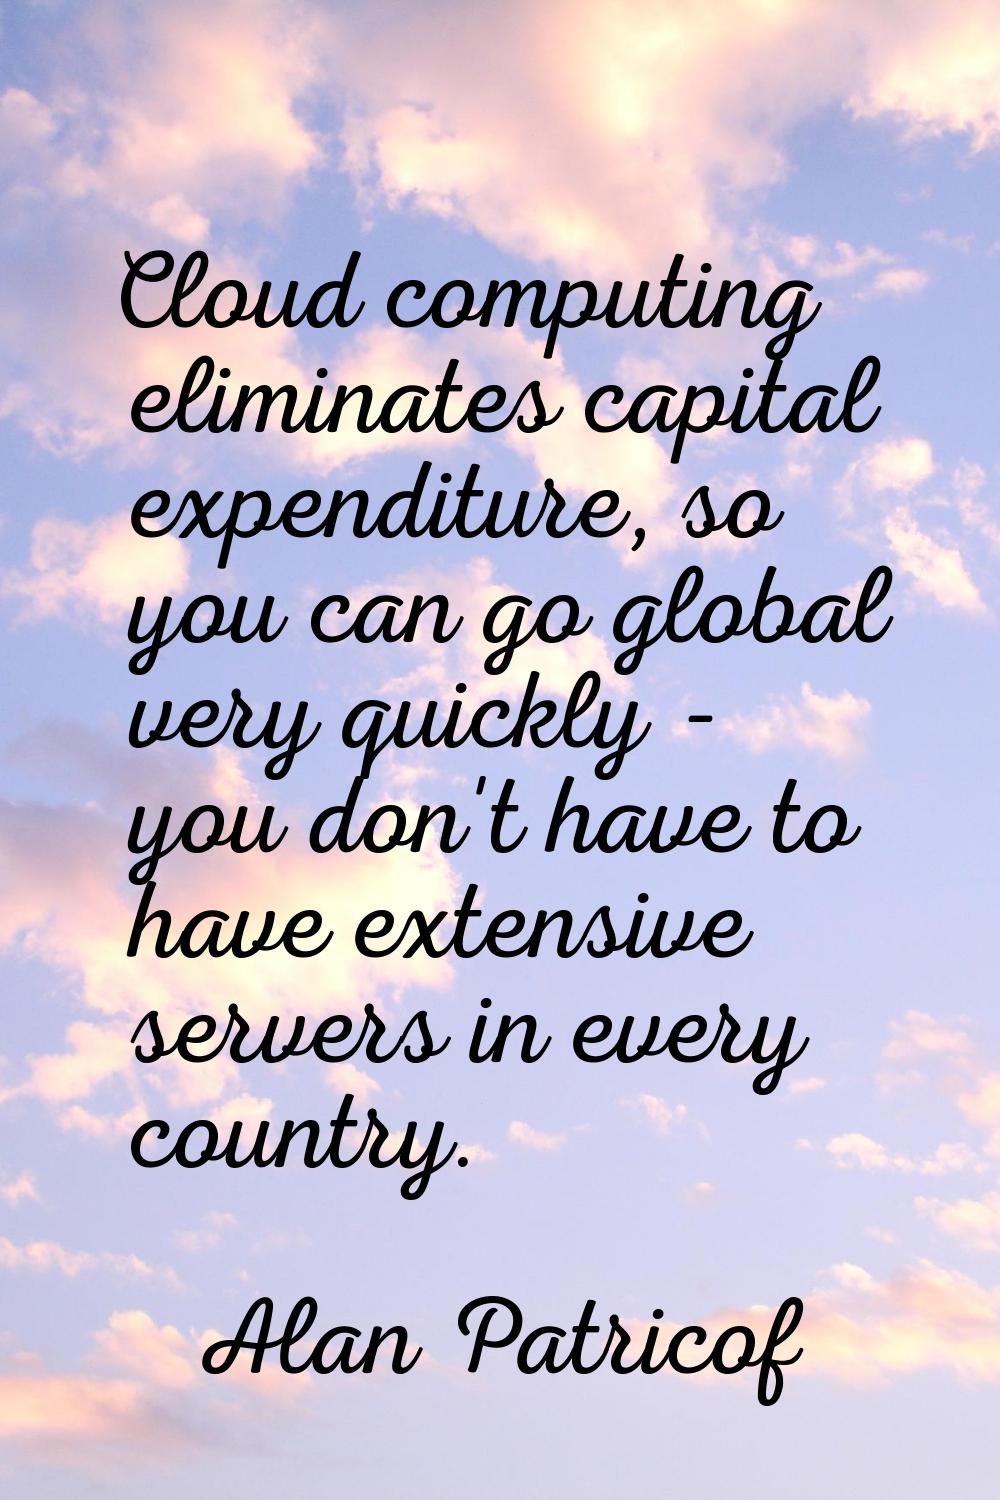 Cloud computing eliminates capital expenditure, so you can go global very quickly - you don't have 